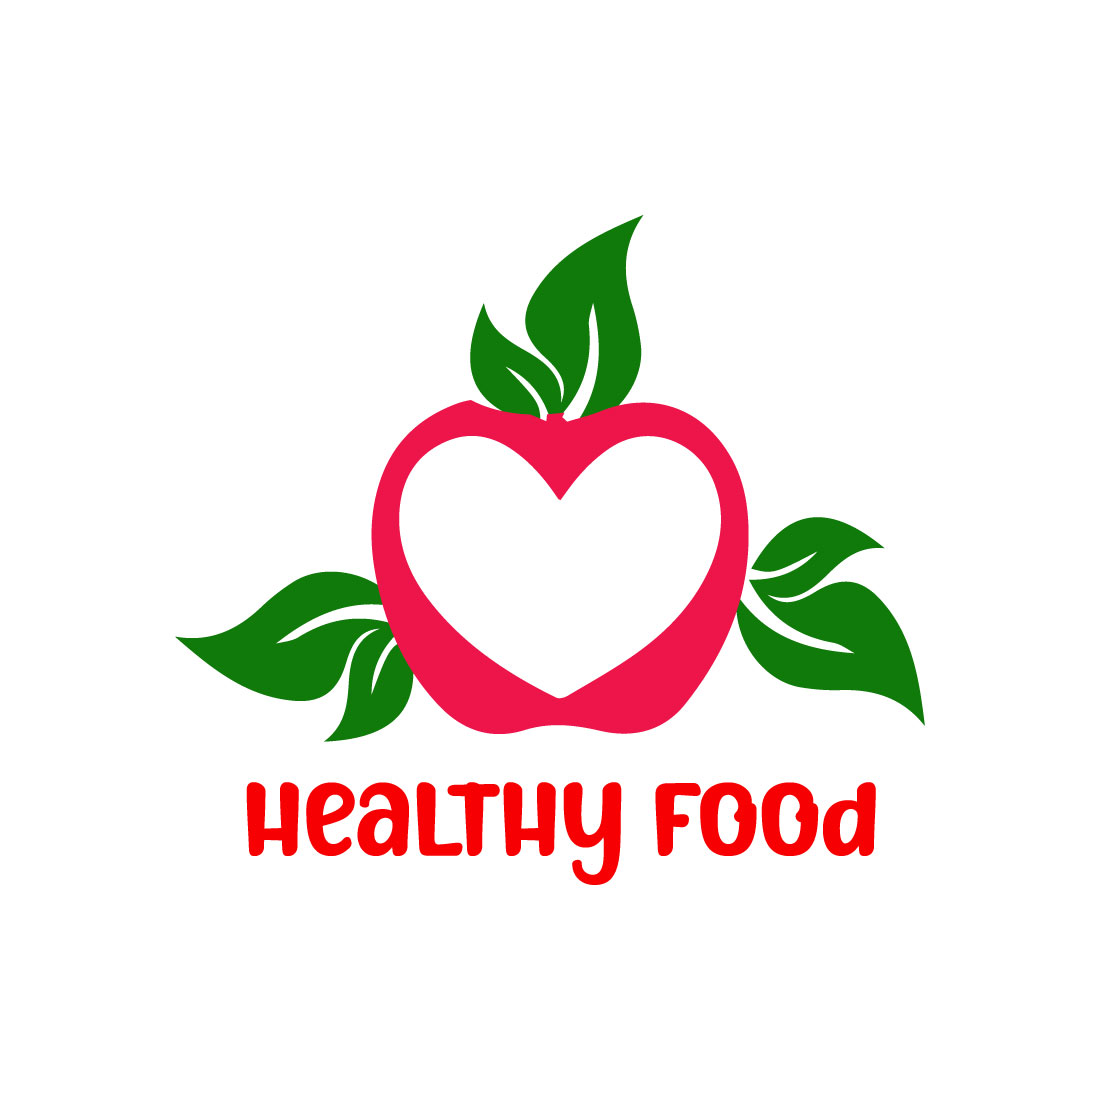 Free Start Your Journey to Health Logo cover image.